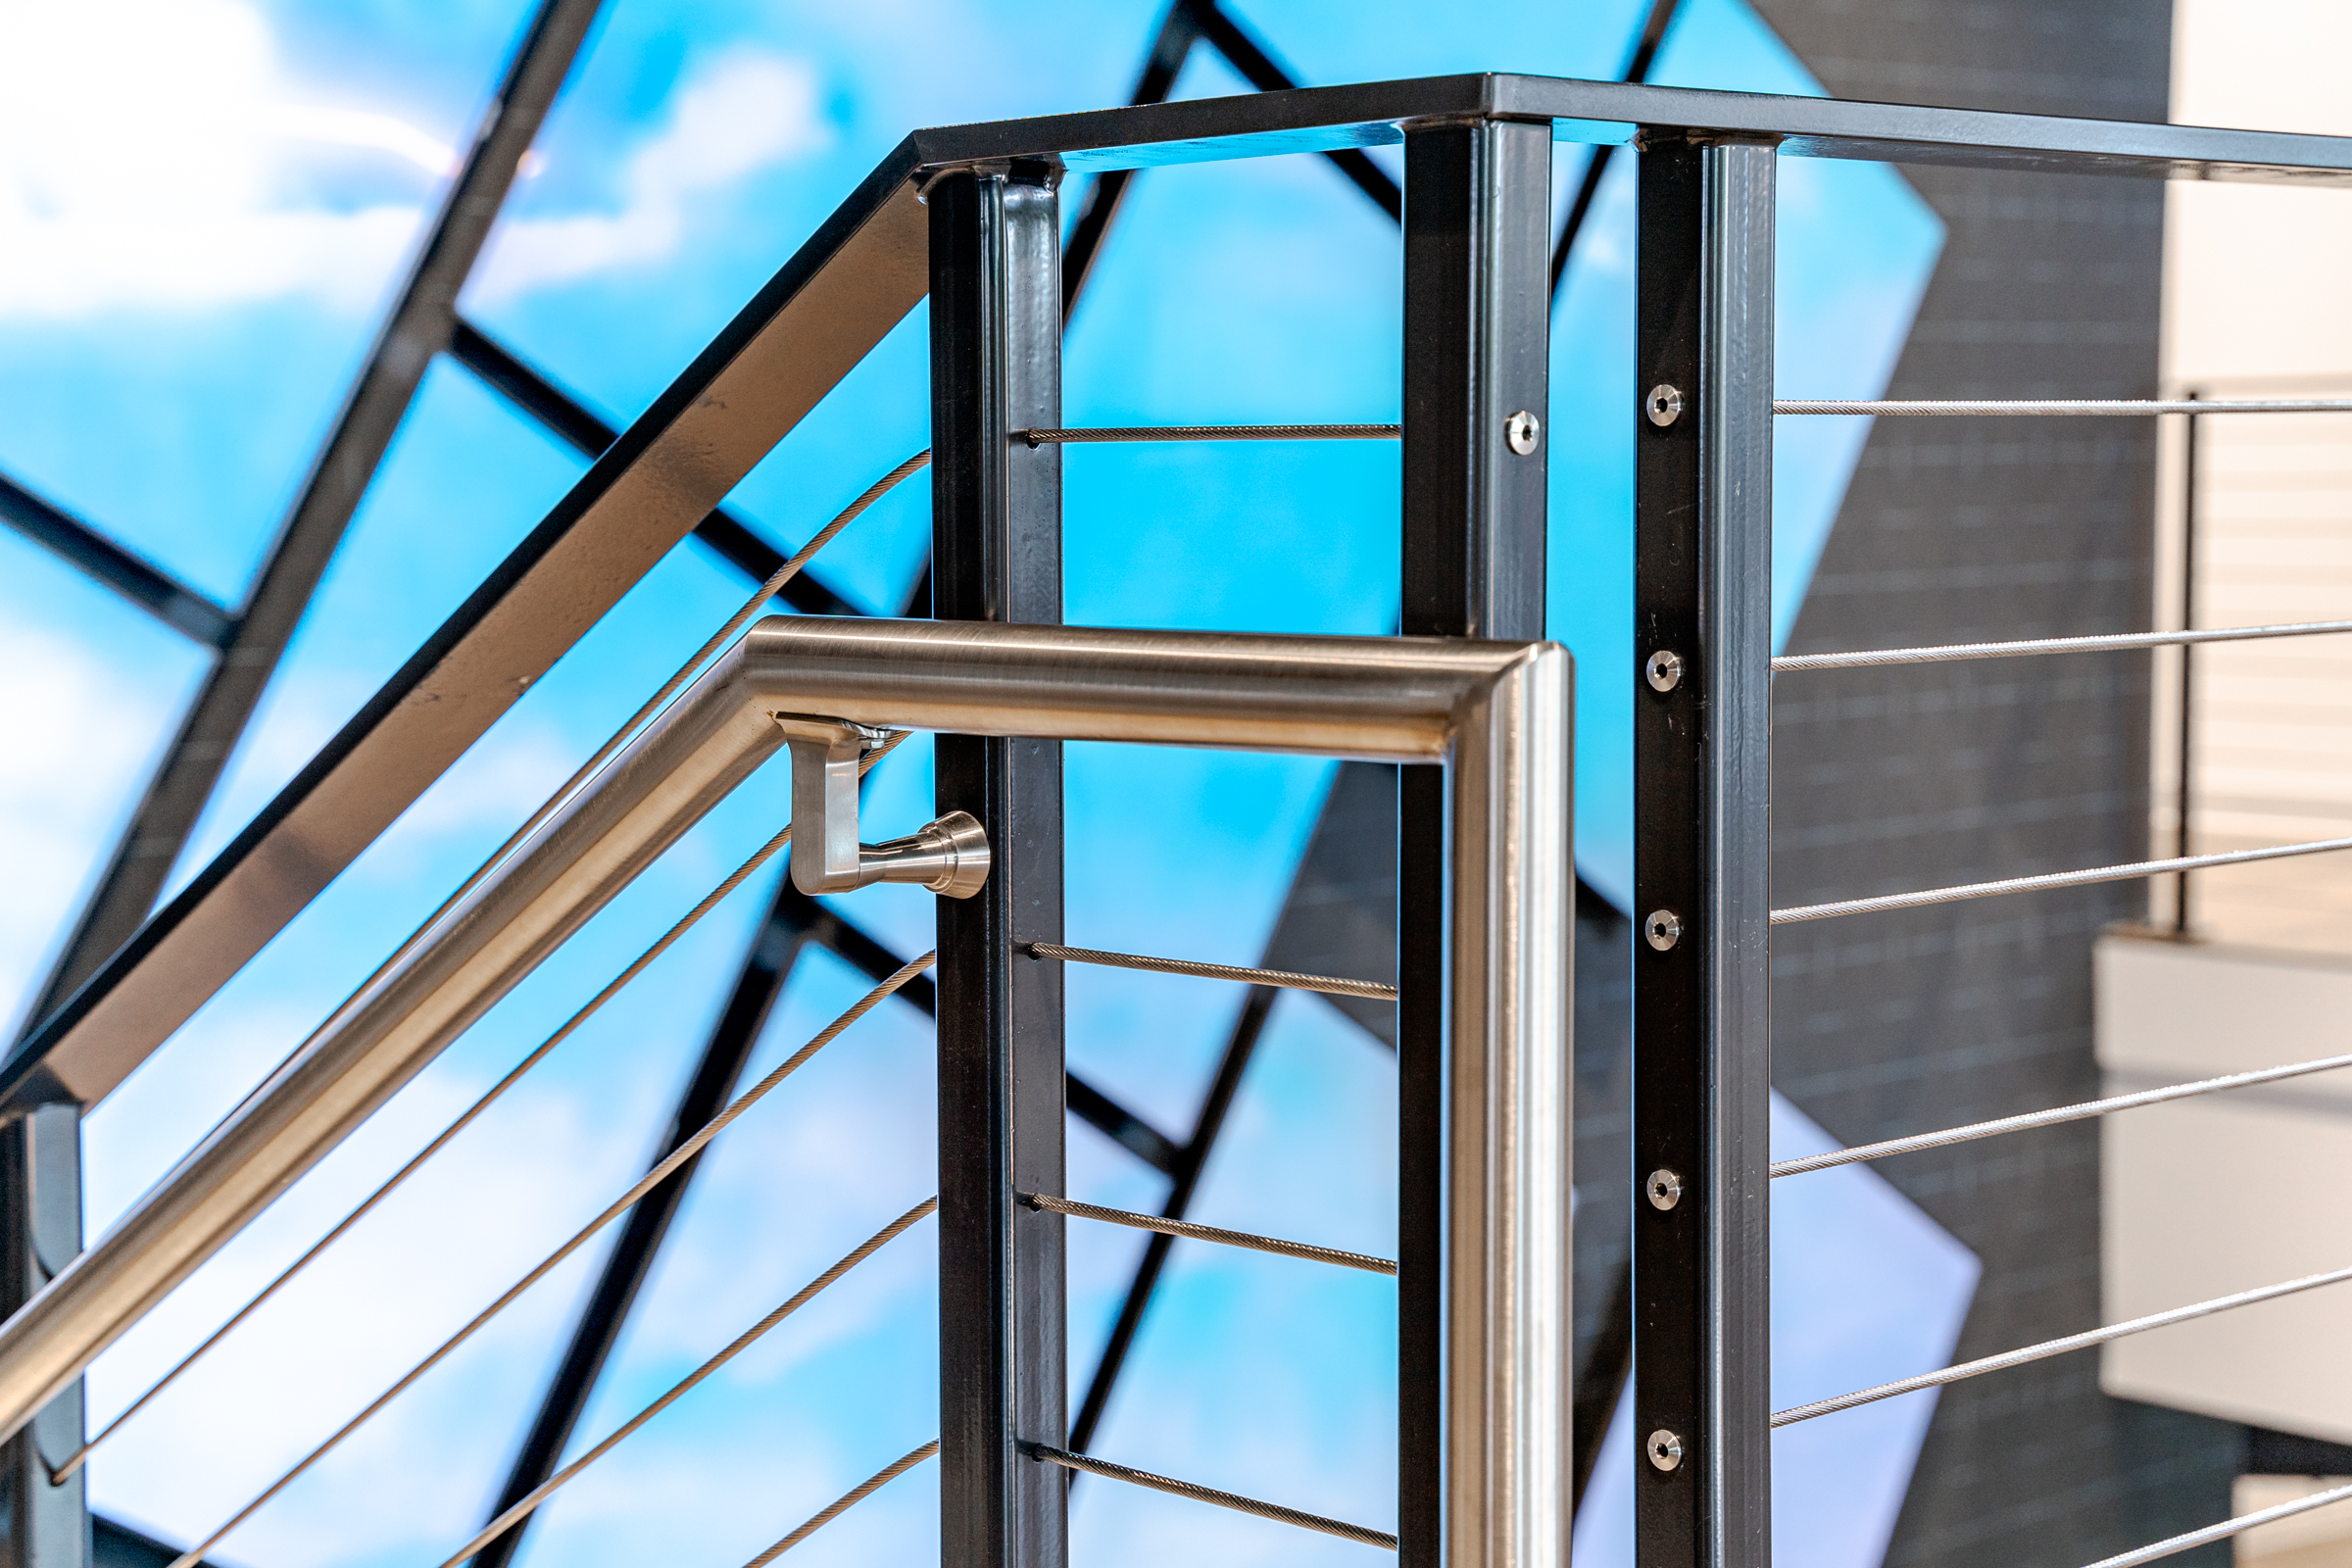 Close up view of architectural railings with stainless steel handrail.